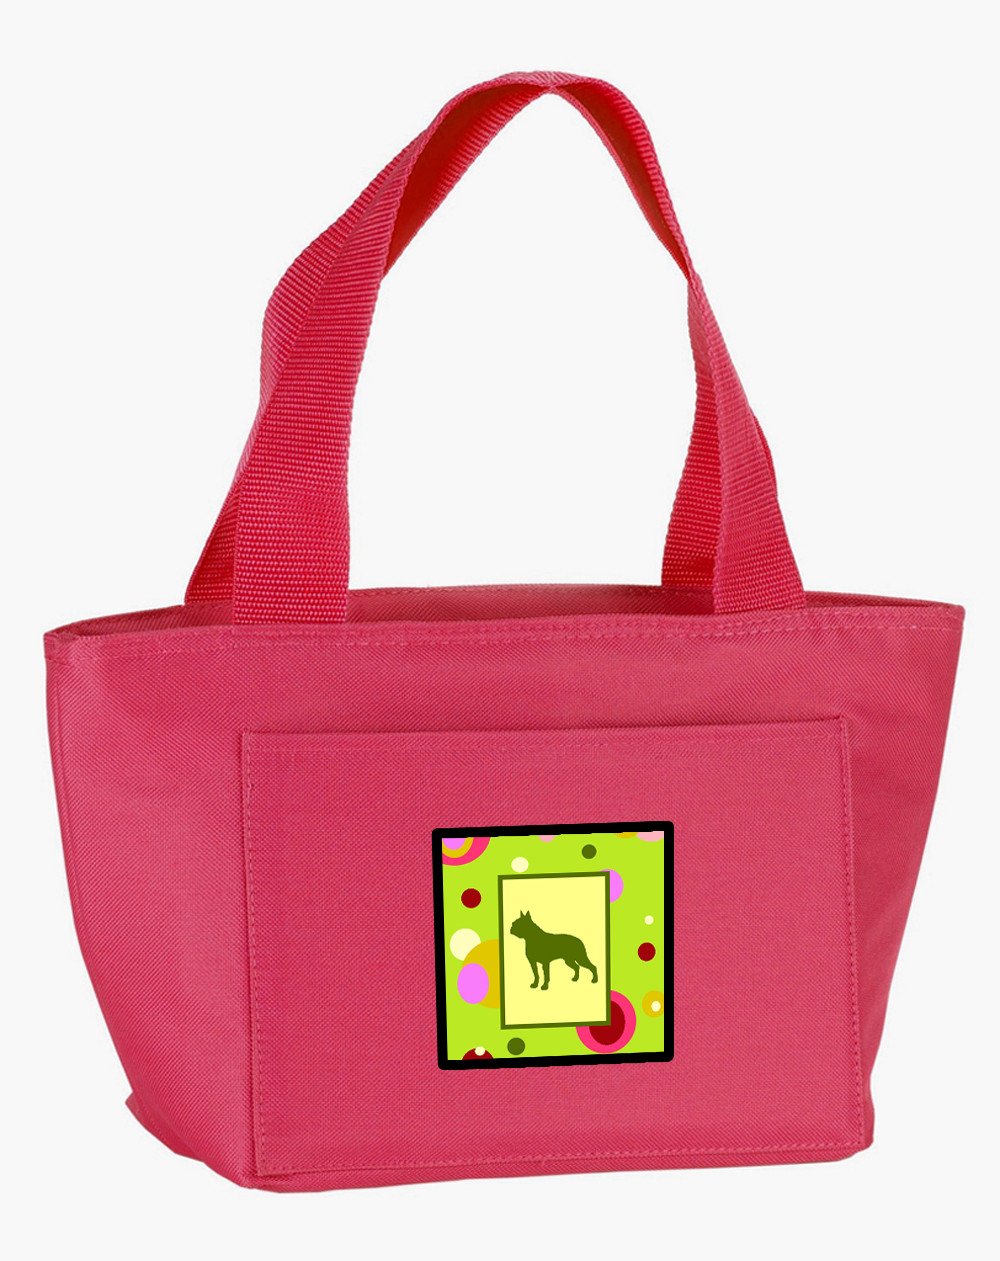 Lime Green Dots Boston Terrier Lunch Bag CK1109PK-8808 by Caroline's Treasures